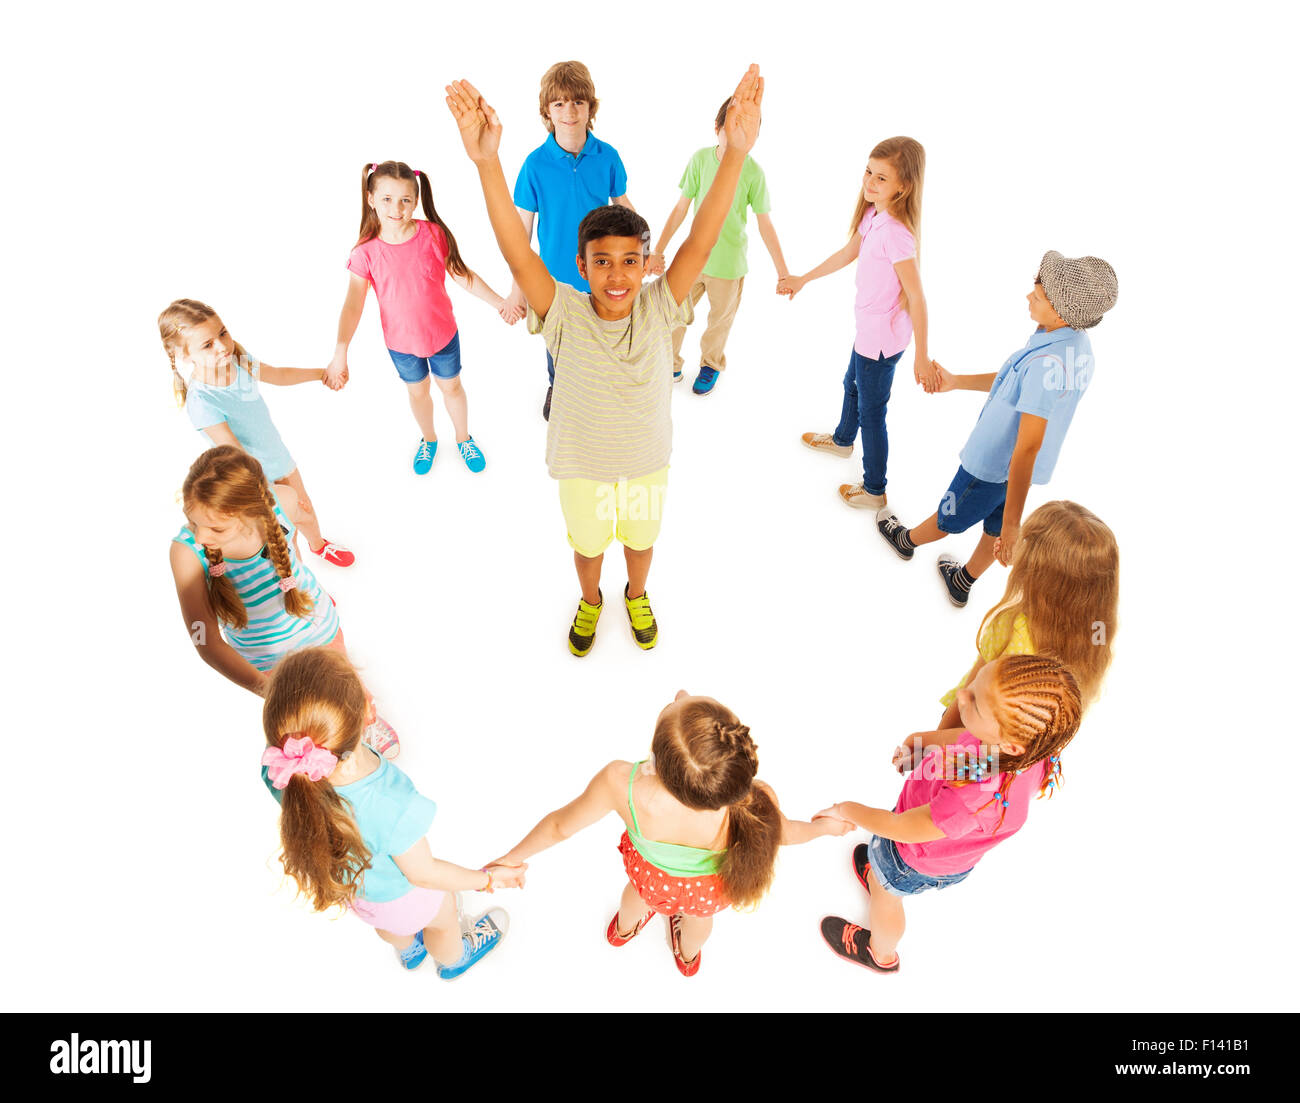 Asian boy in circle of other kids Stock Photo